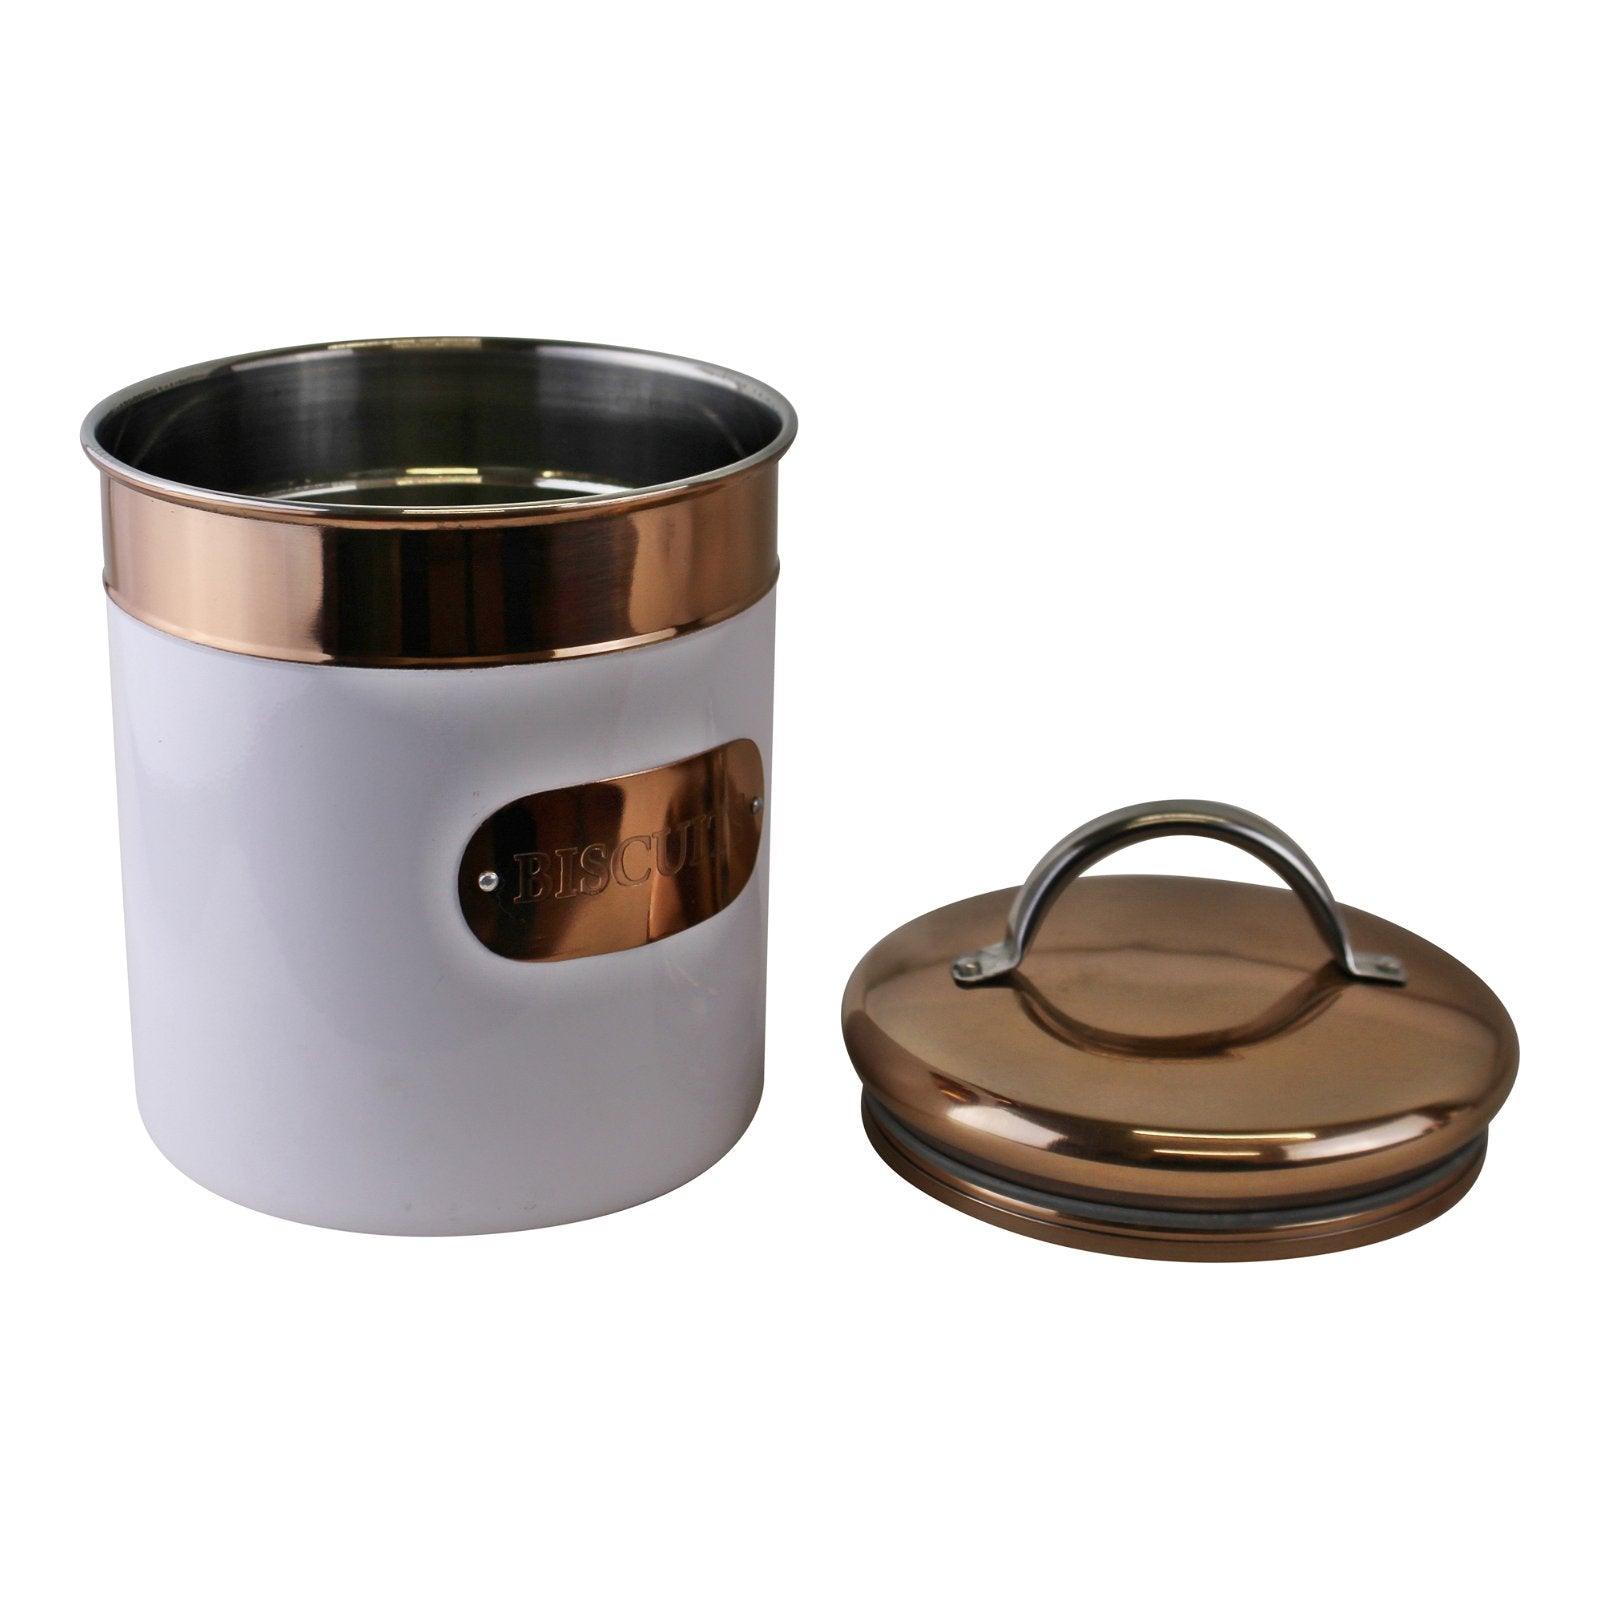 View Biscuit Tin Copper White Metal Design information